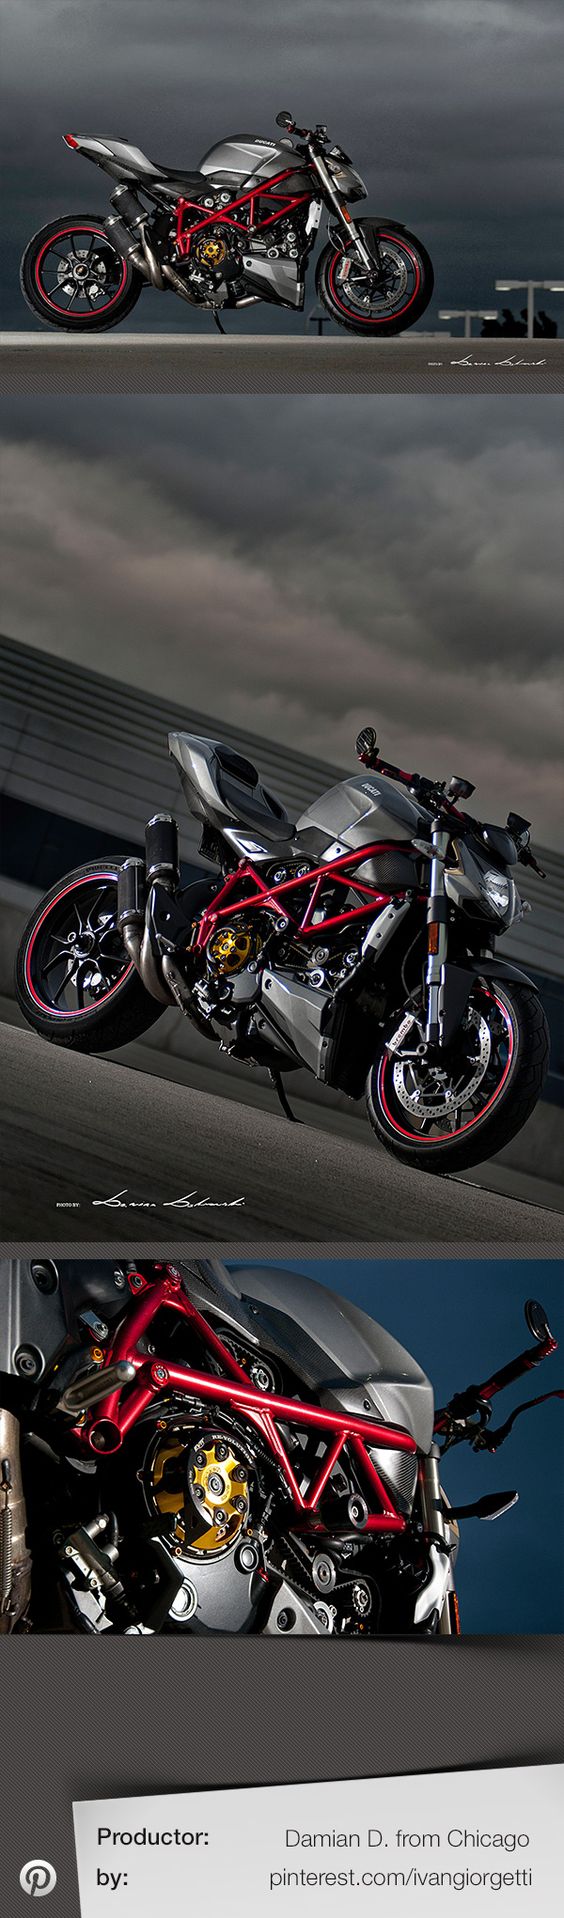 Ducati Streetfighter S by Damian Dabrowski from Chicago